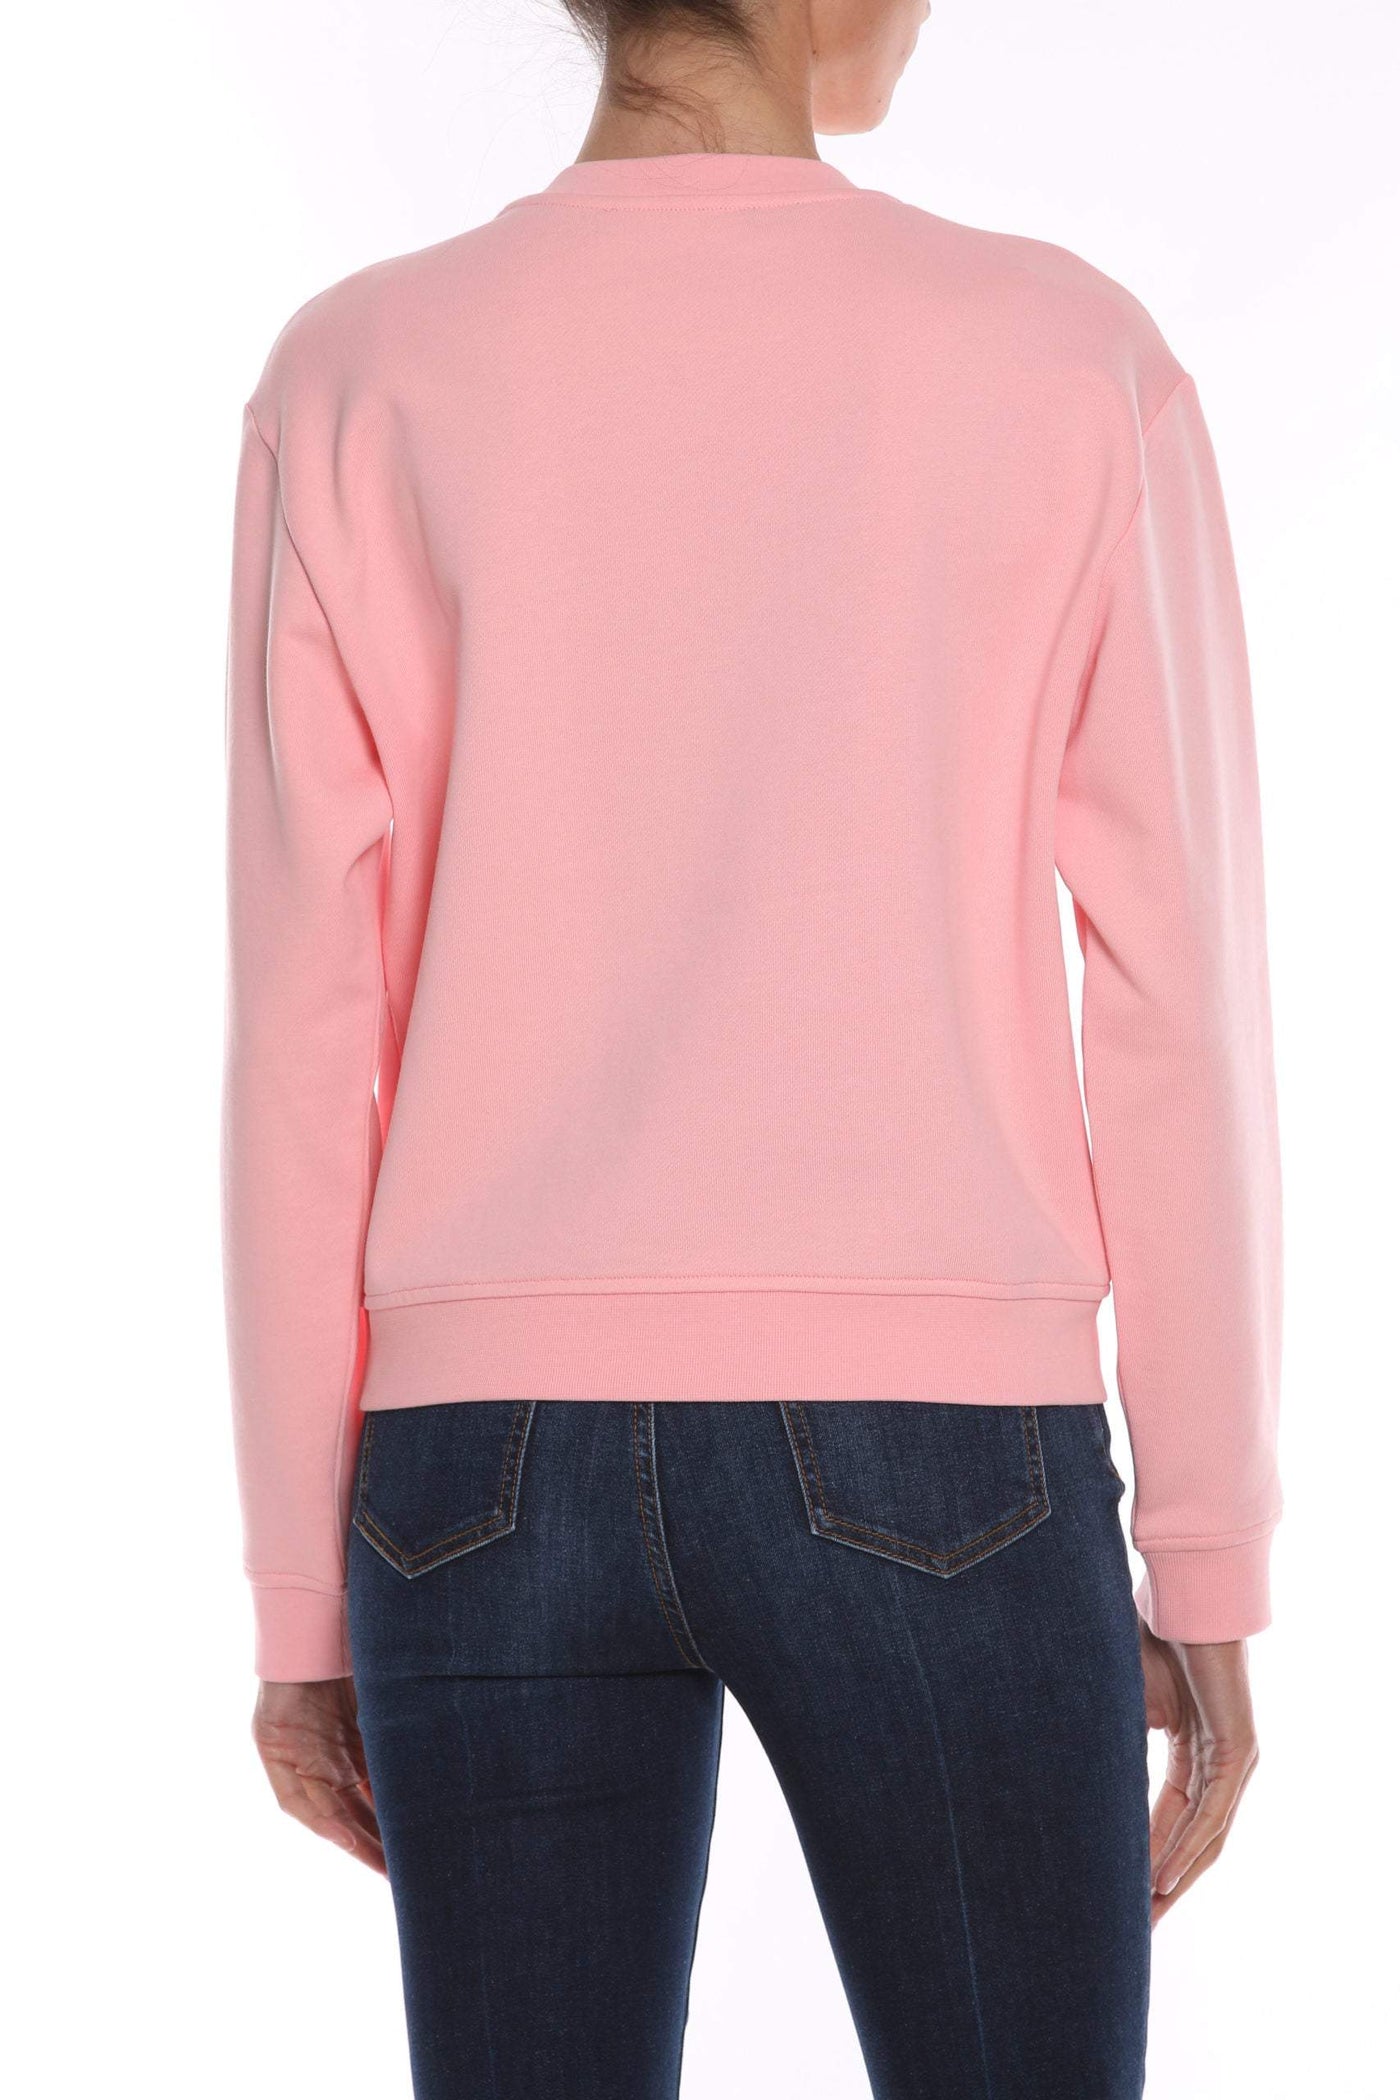 Love Moschino Pink Cotton Sweater feed-1, IT40|S, IT42|M, Love Moschino, Pink, Sweaters - Women - Clothing at SEYMAYKA